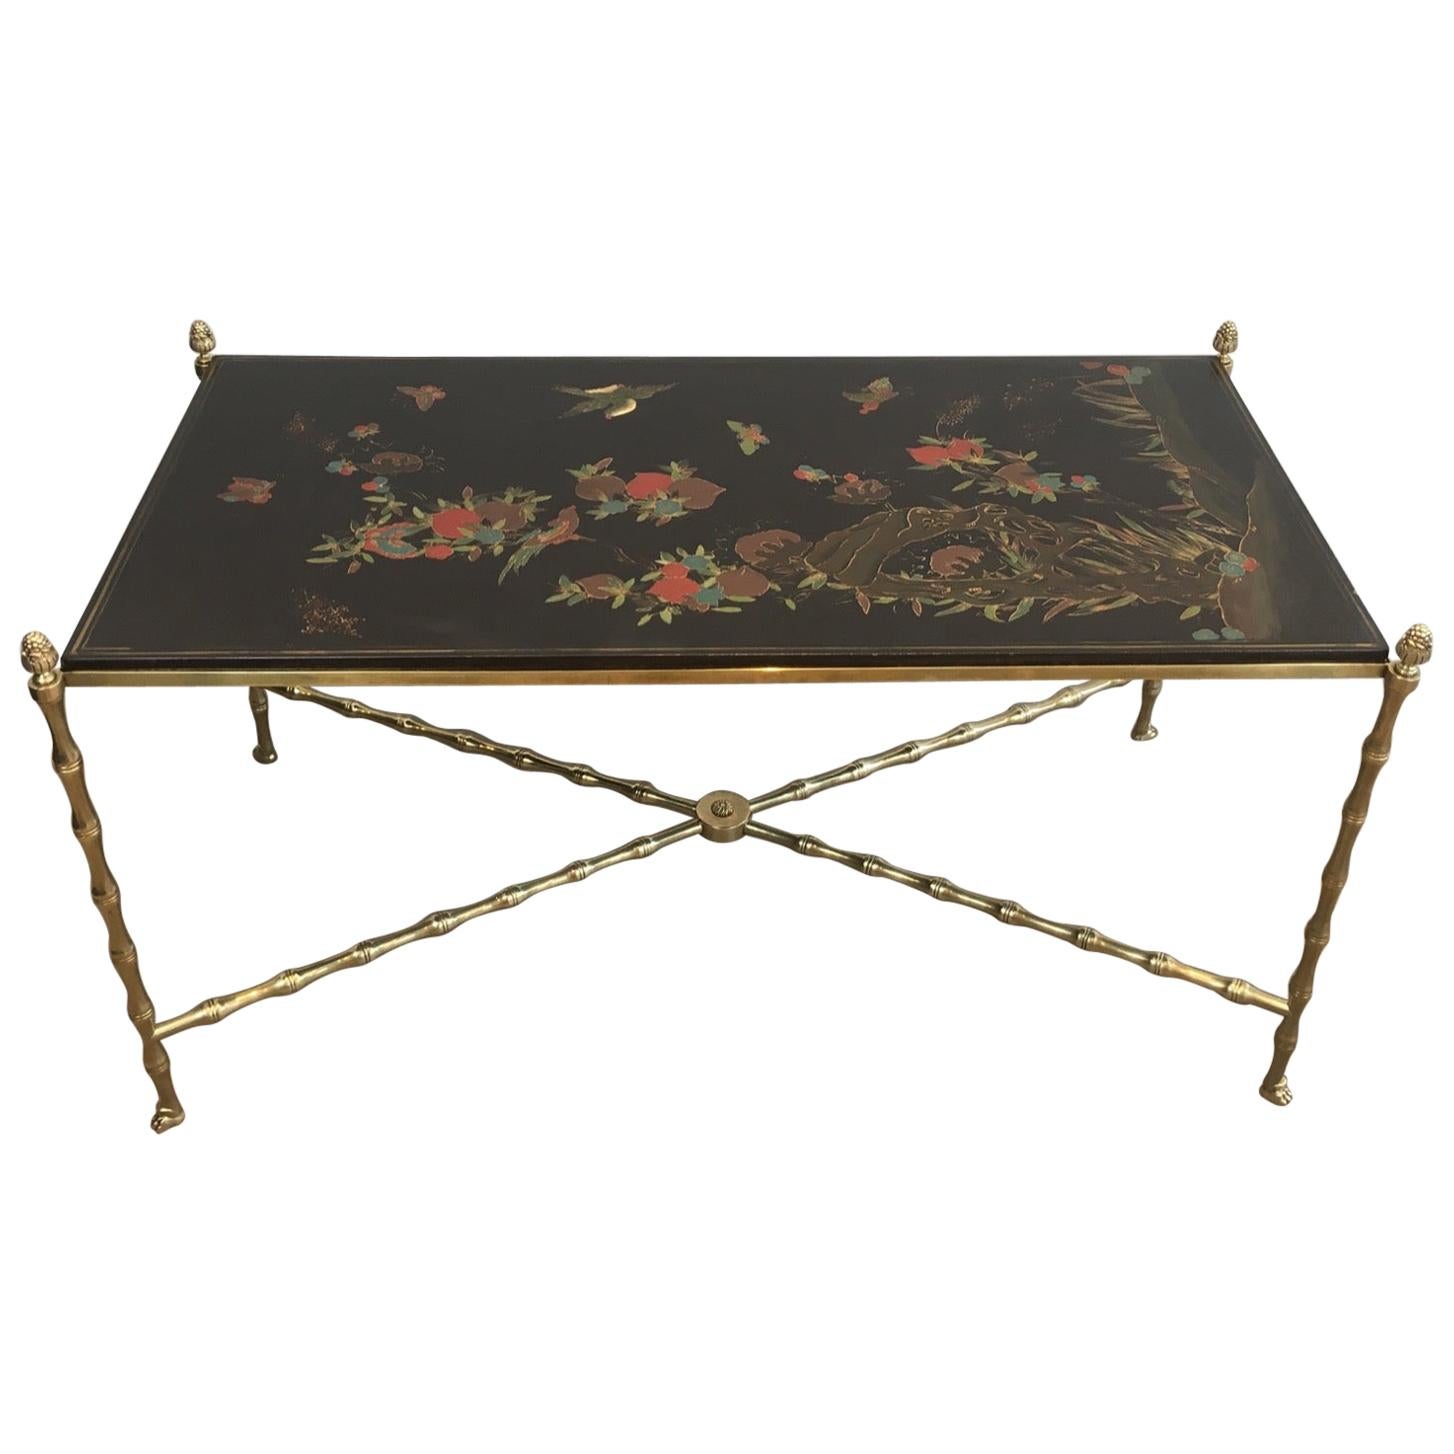 Maison Bagués. Rare Neoclassical Bronze Coffee Table with Faux-Bambo